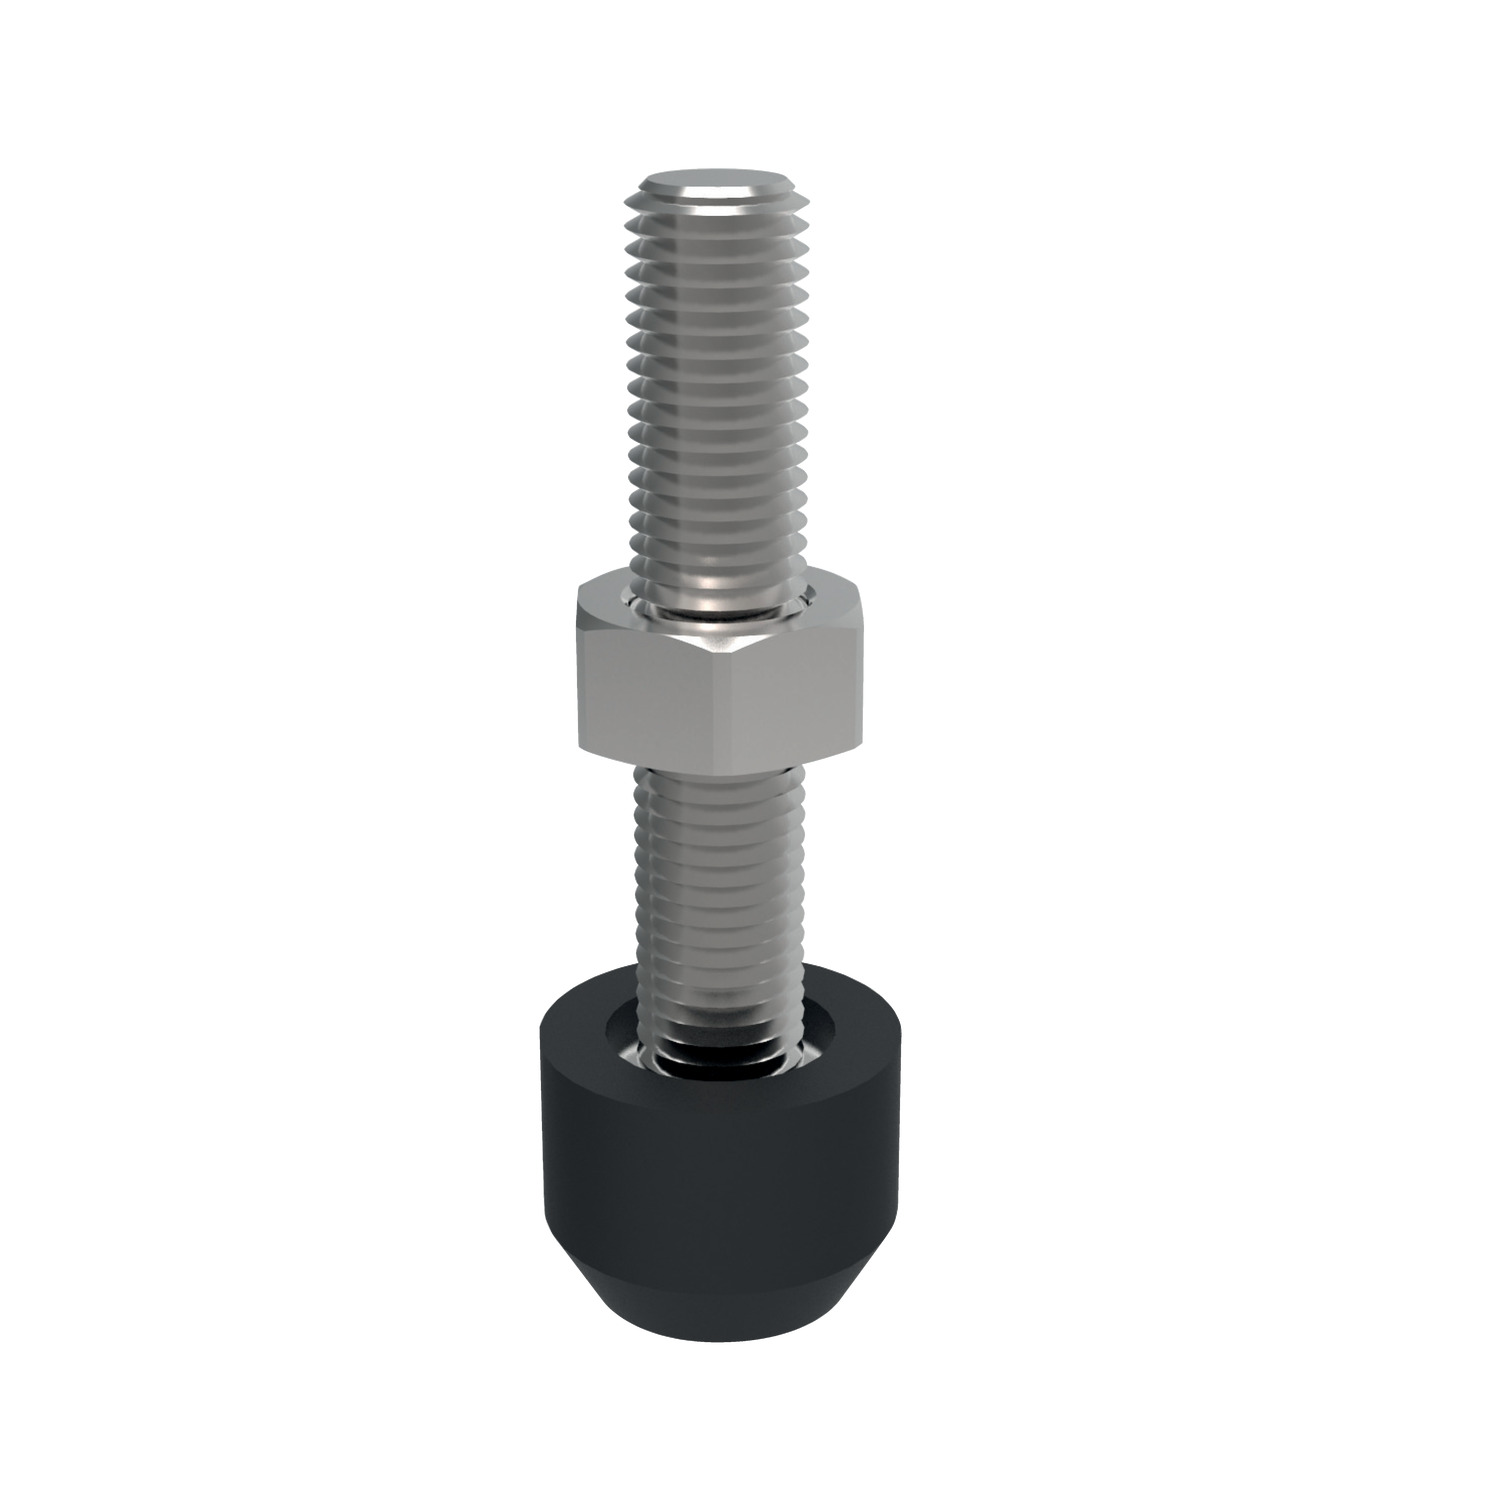 Product 45020.1, Clamping Screws for push-pull toggle clamps / 